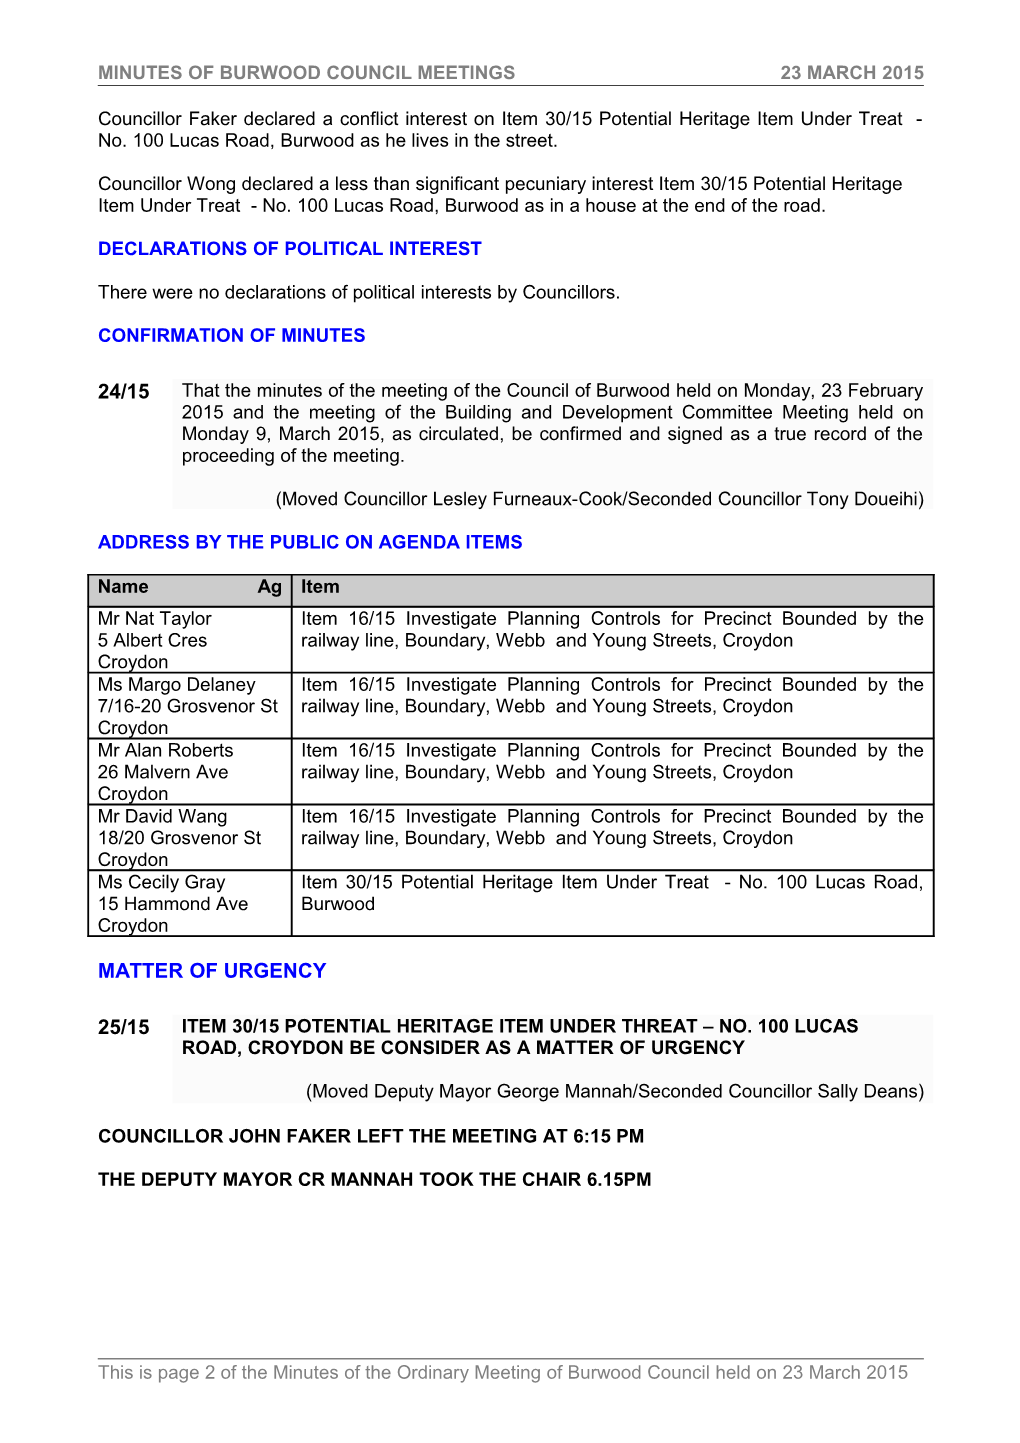 Pro-Forma Minutes of Burwood Council Meetings - 23 March 2015